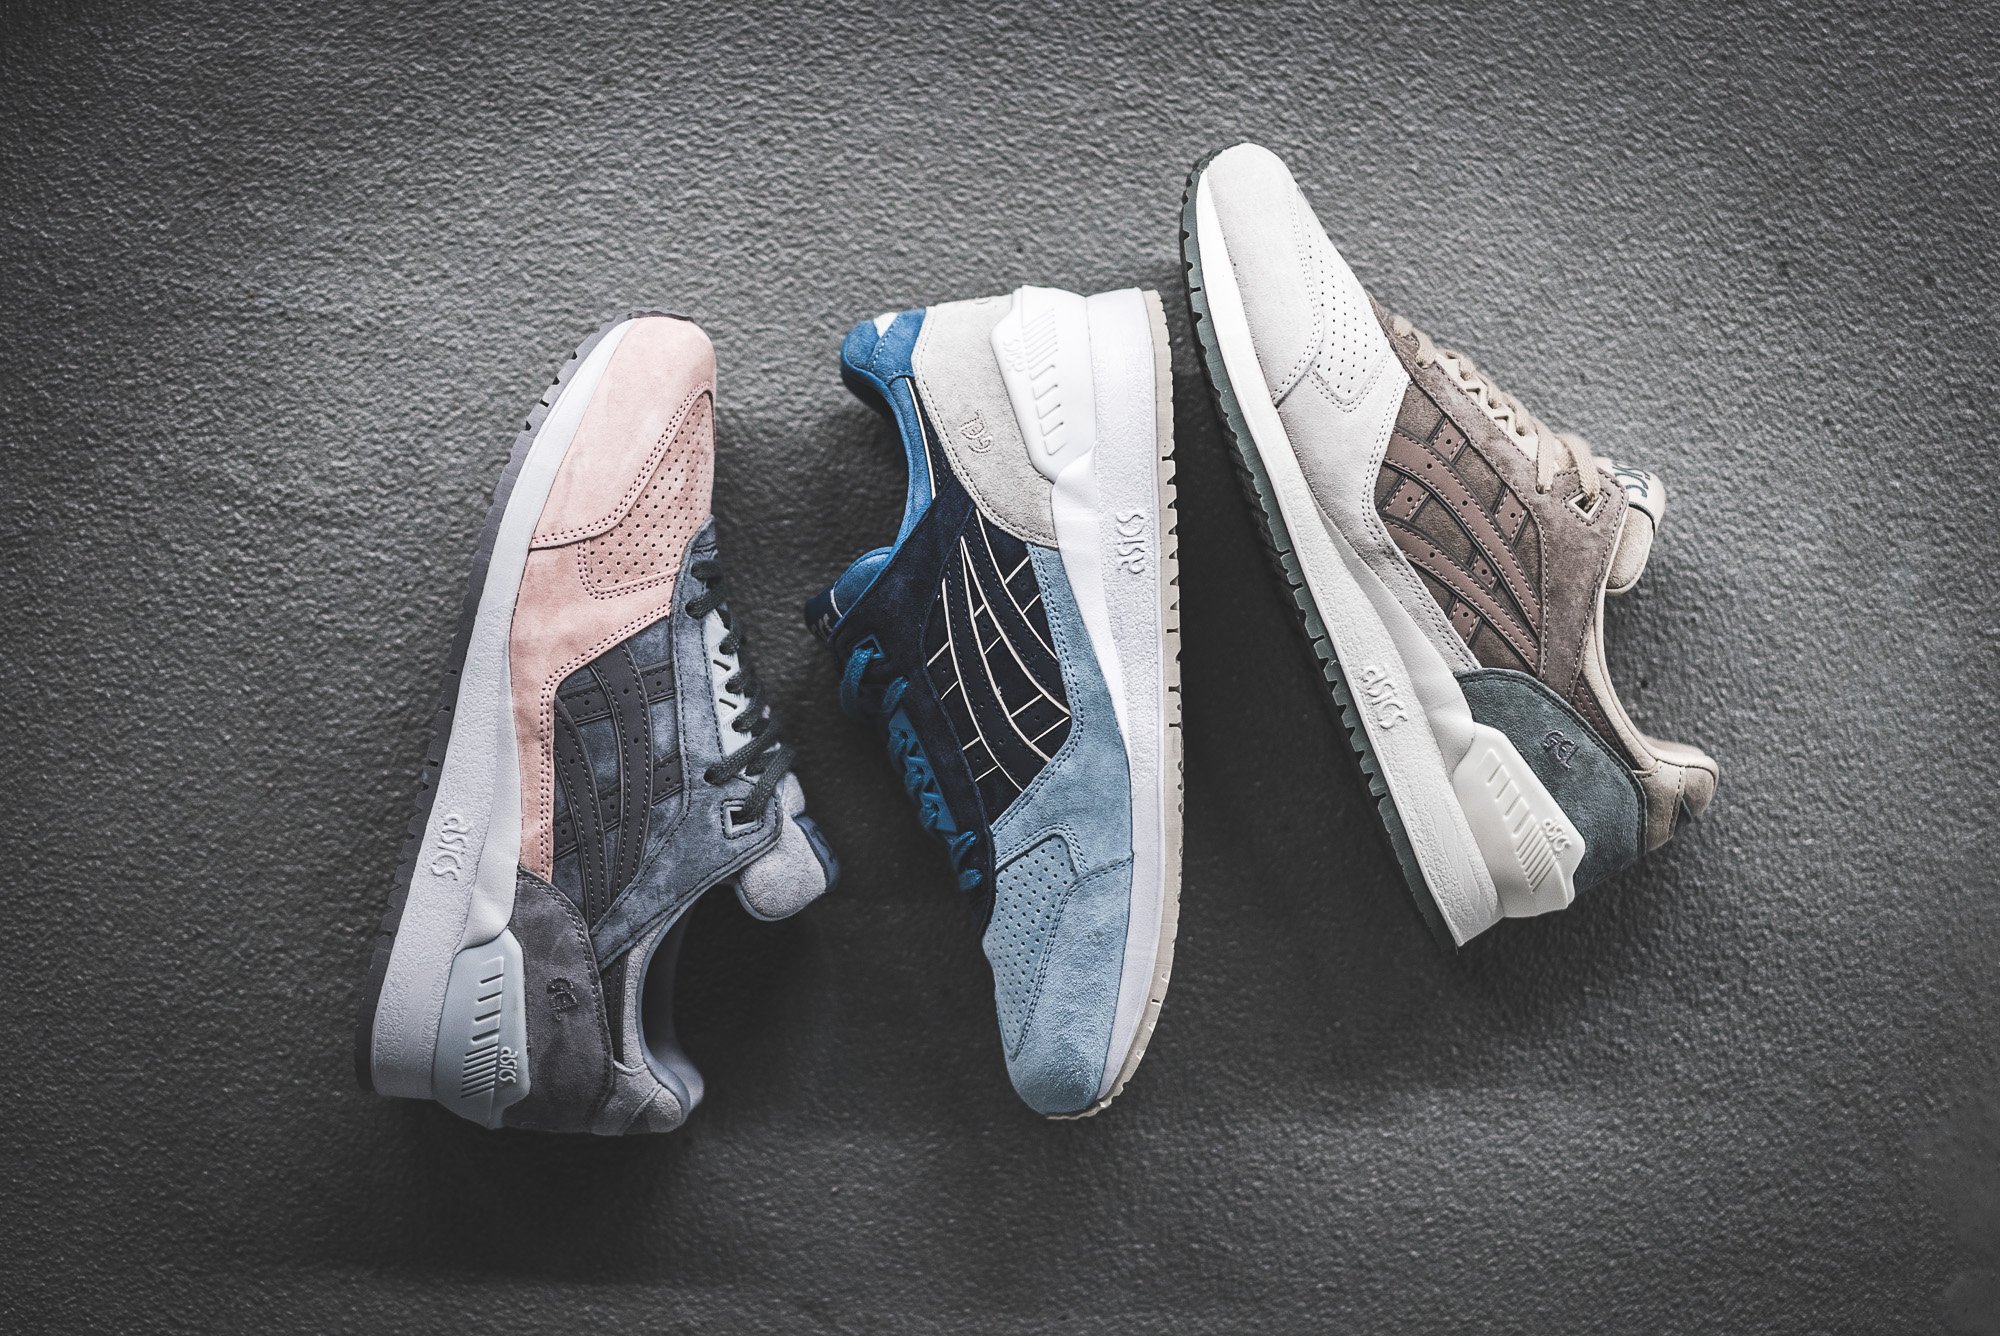 43einhalb on X: "***RELEASE REMINDER*** The @asics Gel-Respector "Japanese  Garden Pack" will be available at our shop from tomorrow:  https://t.co/tHMSaS31Vz https://t.co/szb565cB6k" / X